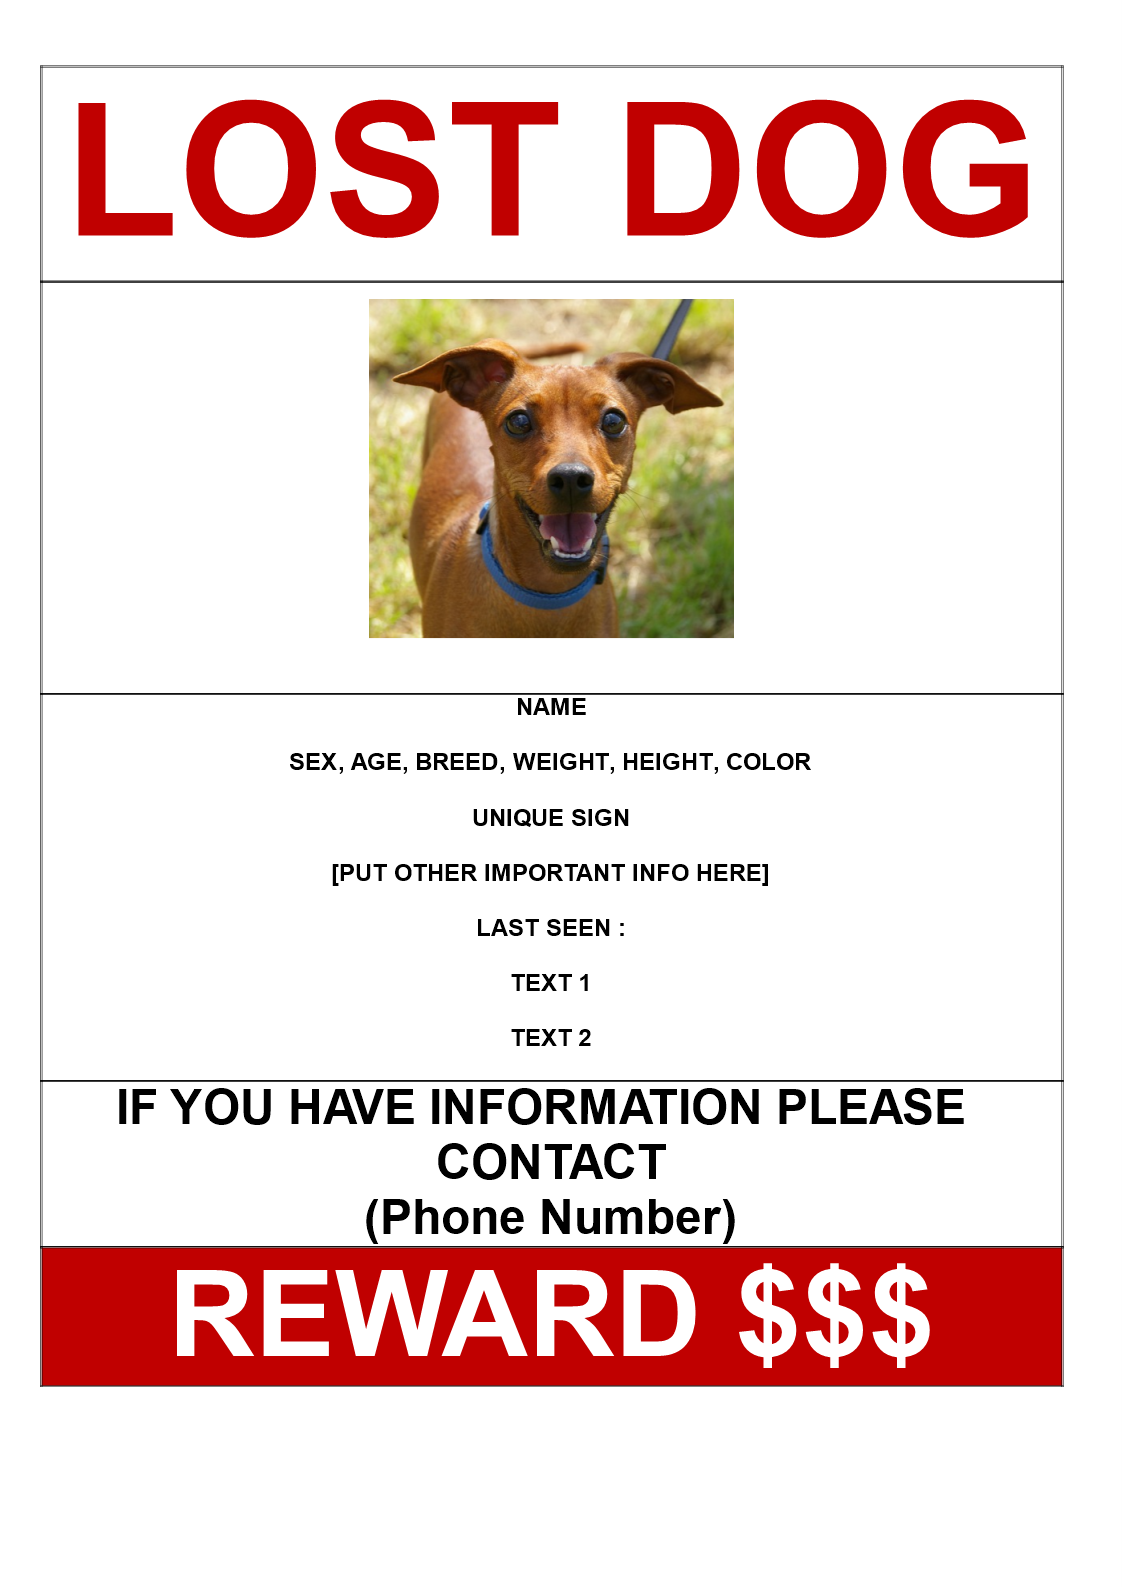 Missing Dog Poster with reward A3 size 模板